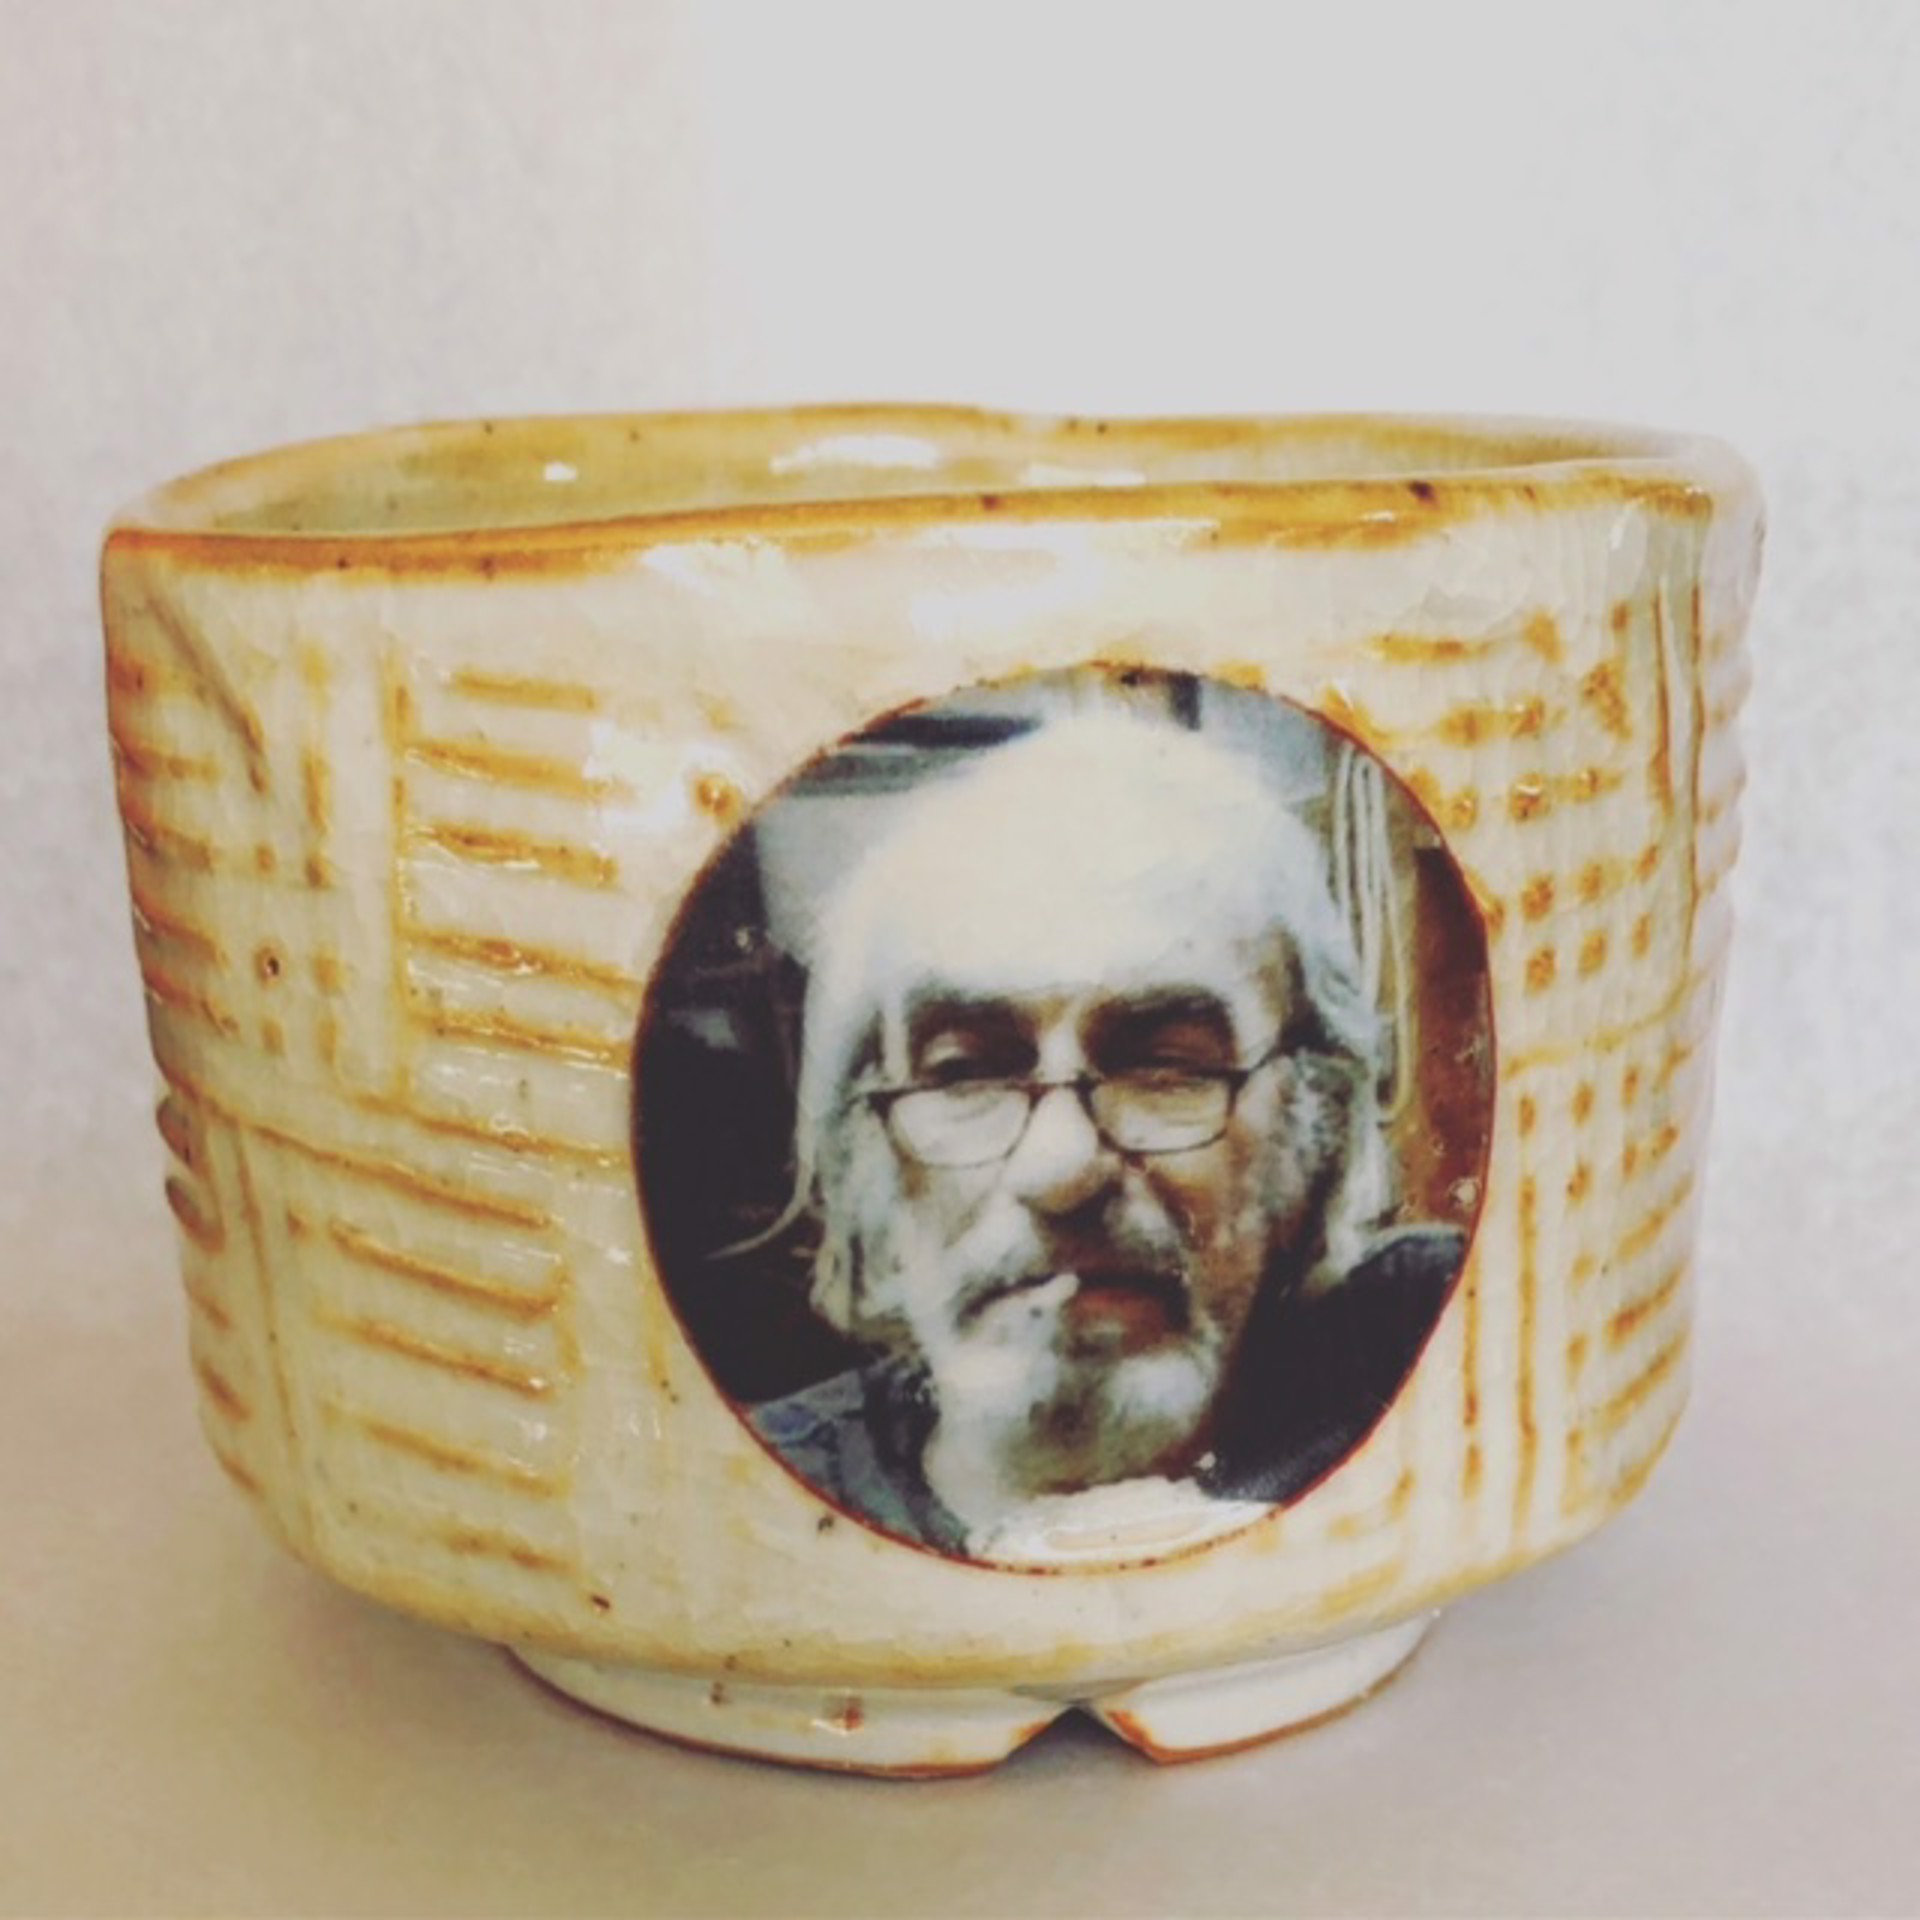 “Peter Voulkos,” yunomi by Daniel Anderson